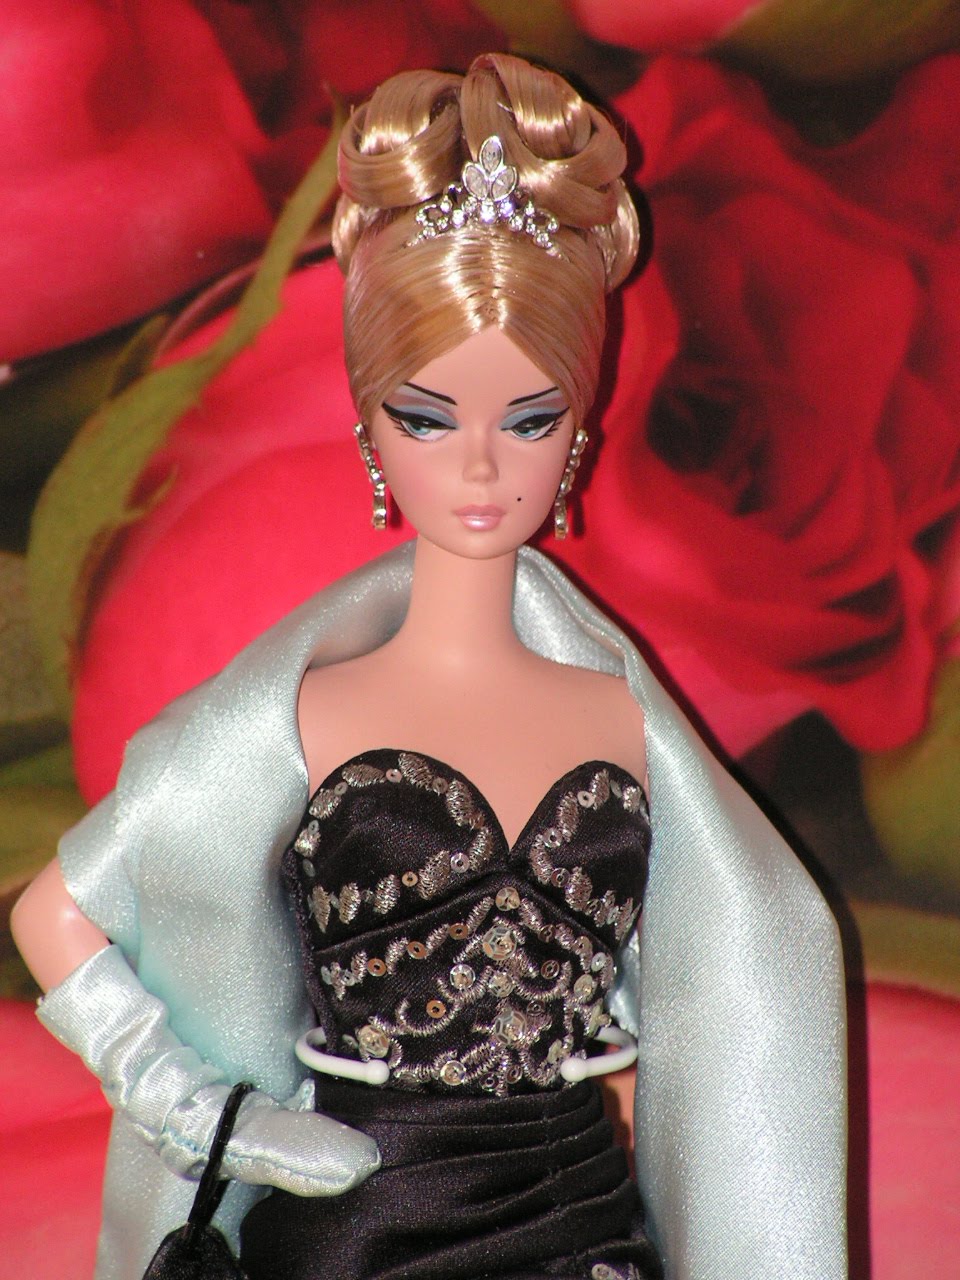 Royalty.Girl: 2002 Barbie Fashion Model Country Bound And Stolen Magic